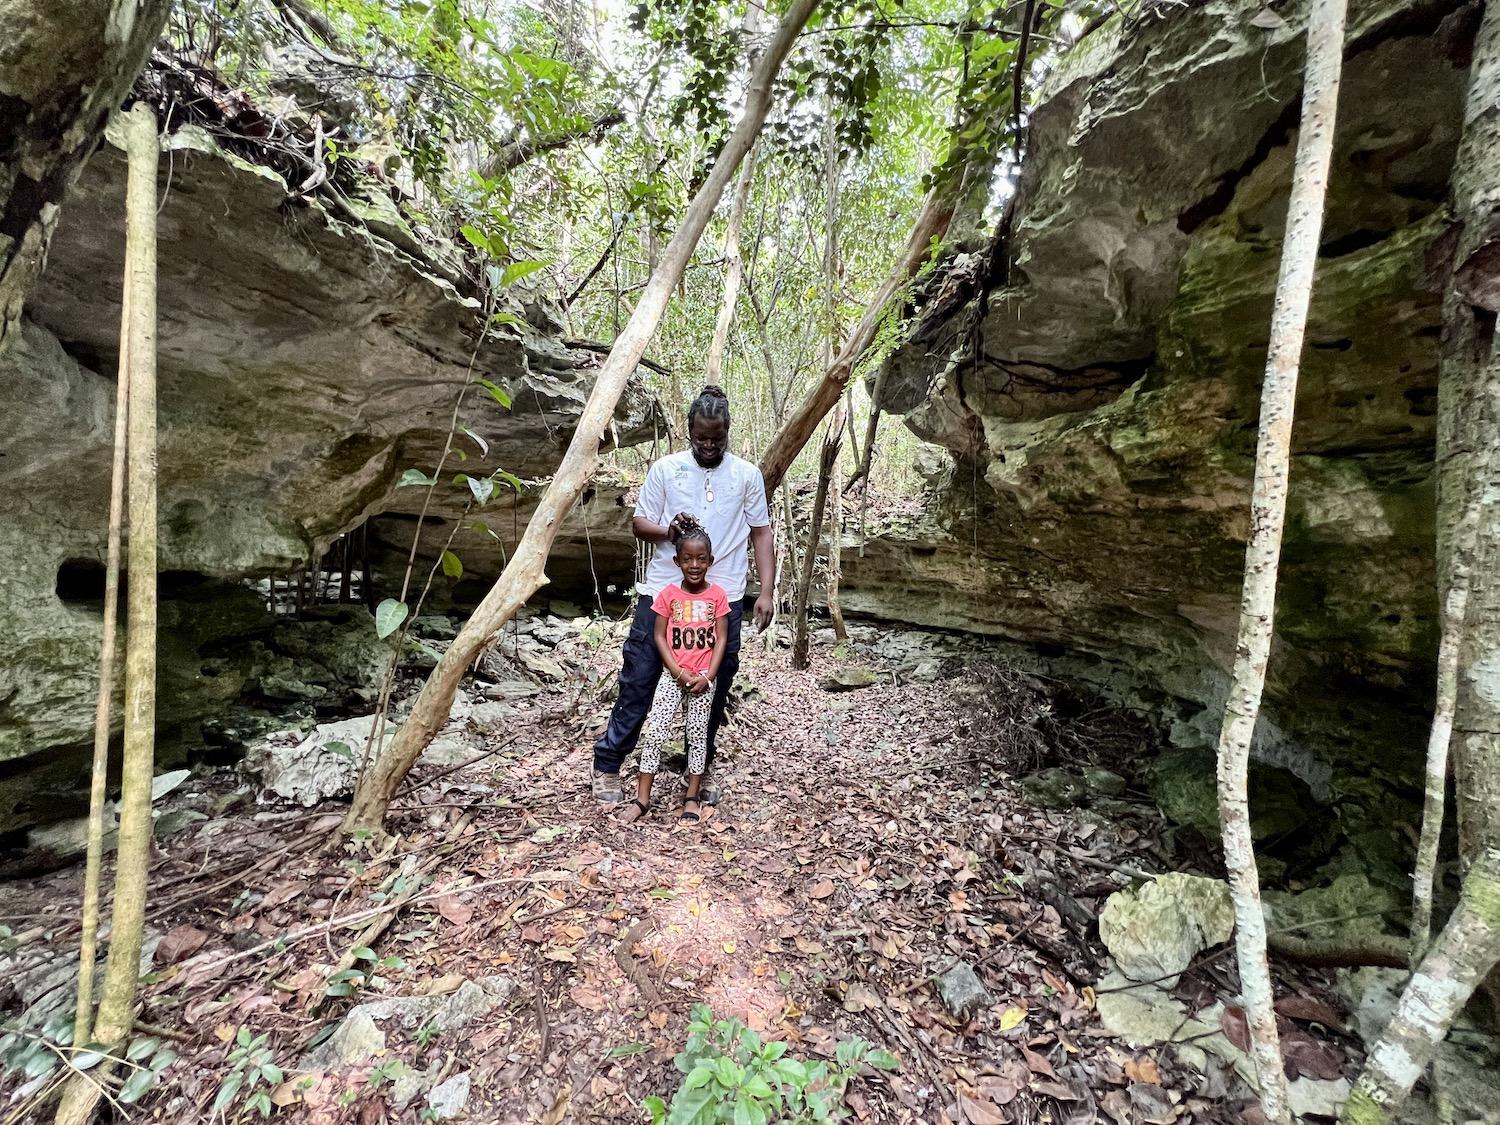 Kristoff Francois leads a tour of Primeval Forest National Park with daughter Kristia in tow.